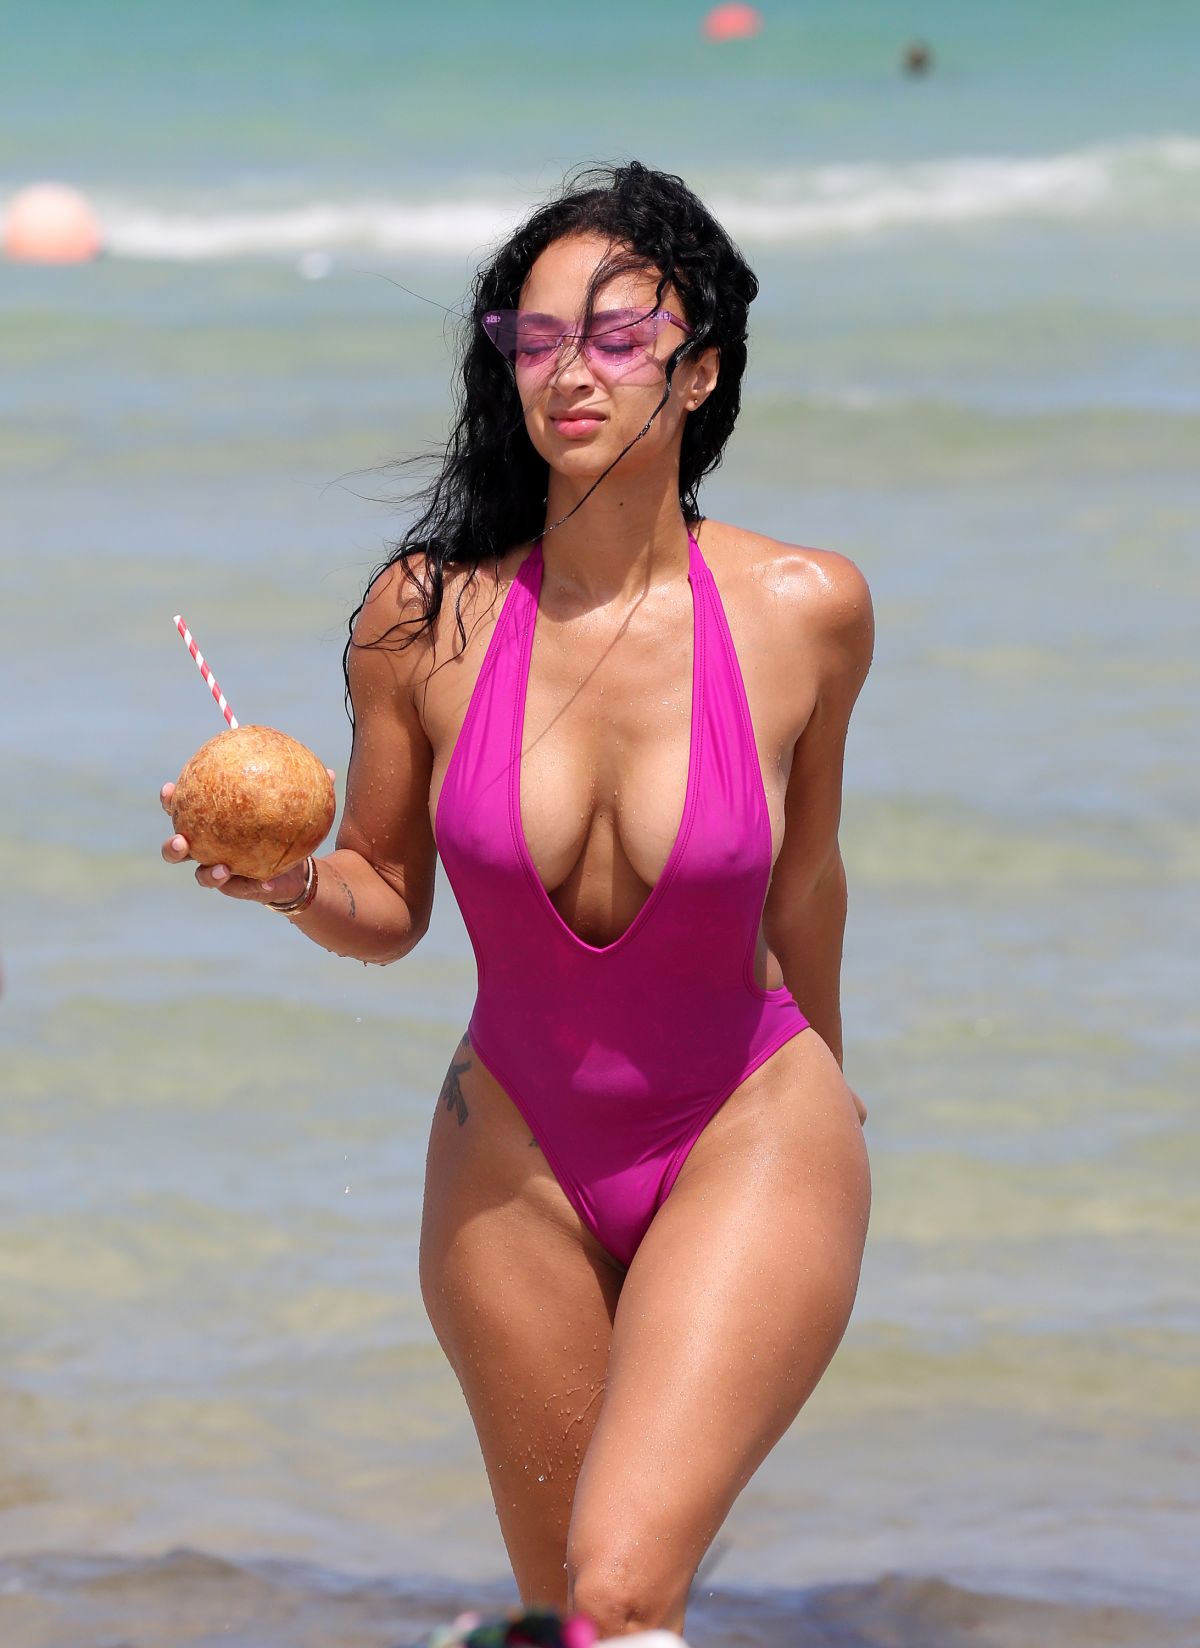 DRAYA MICHELE in Swimsuit at a Beach in Miami 05/15/2018. 